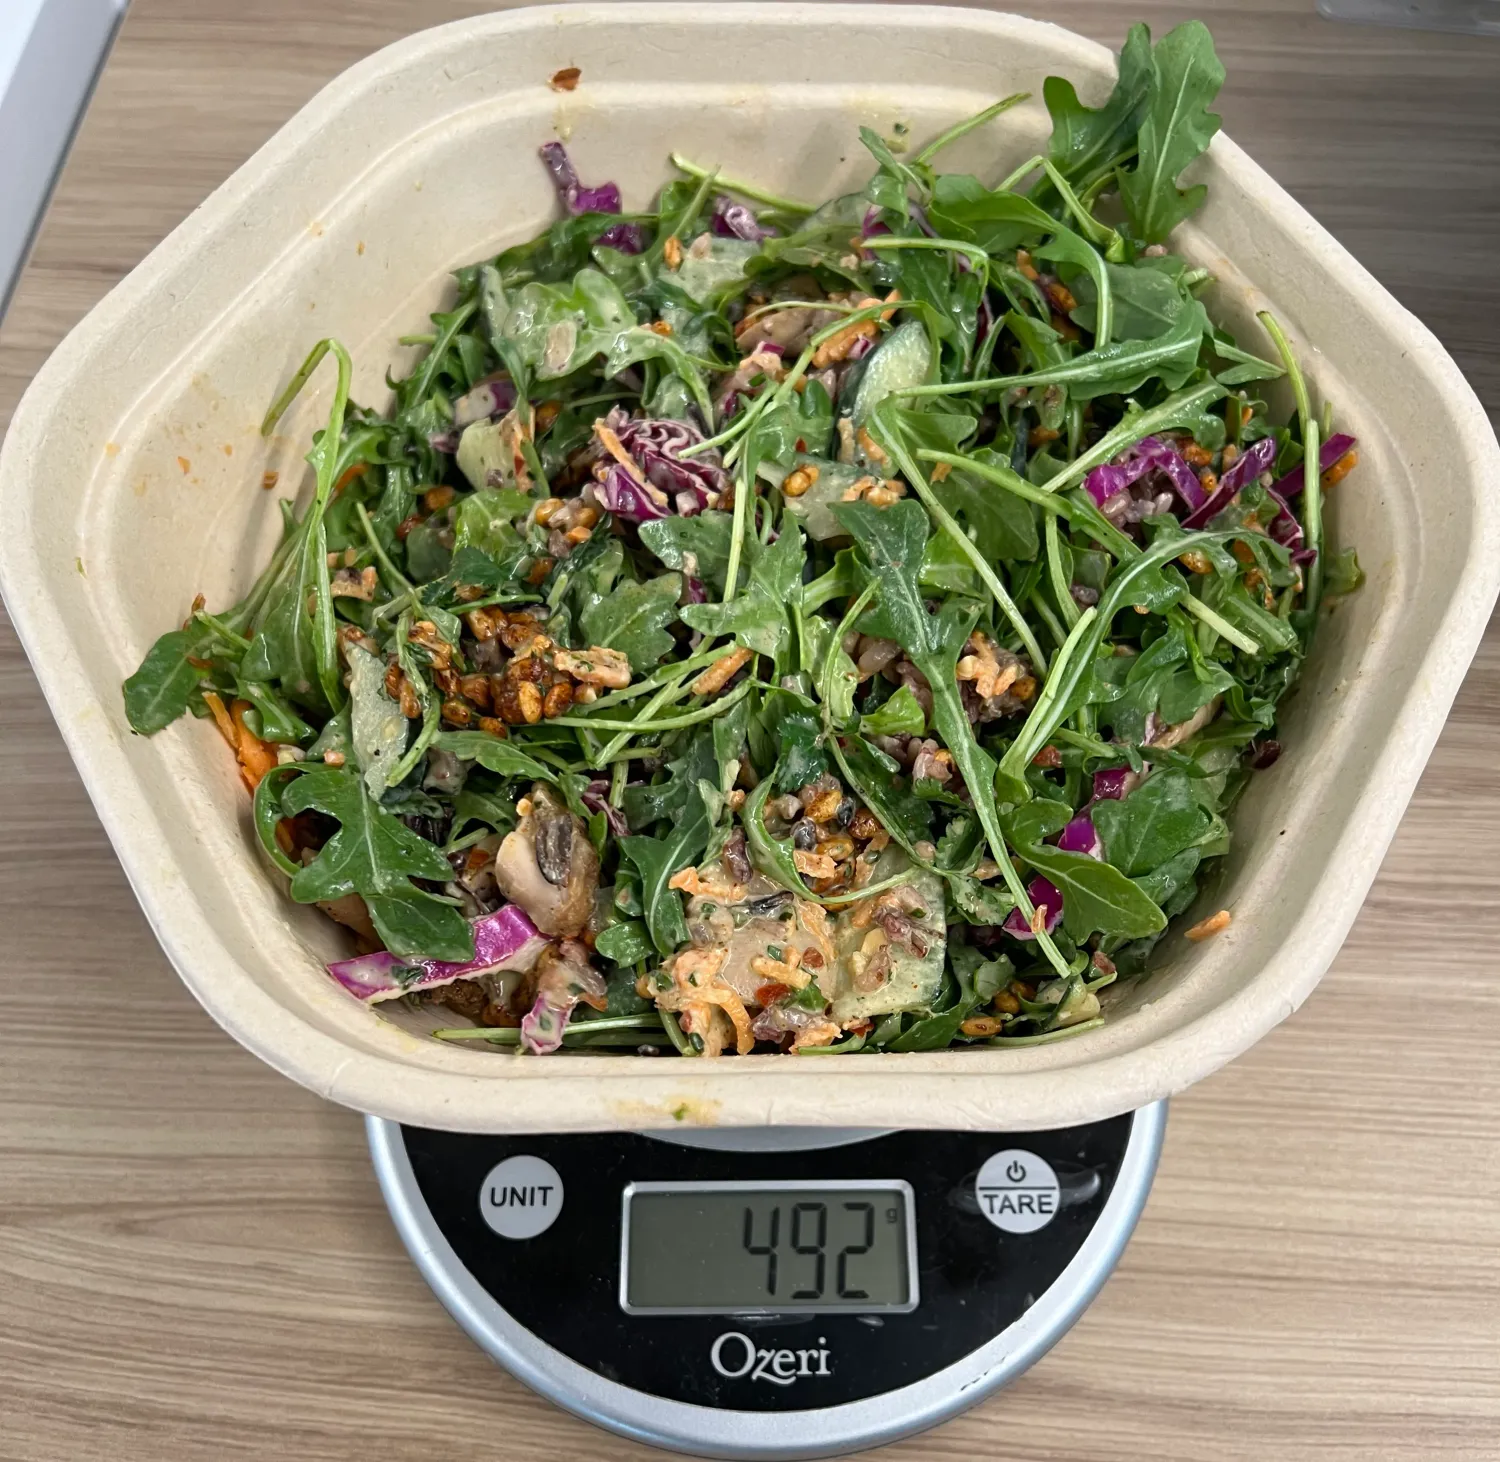 A salad from Sweetgreen